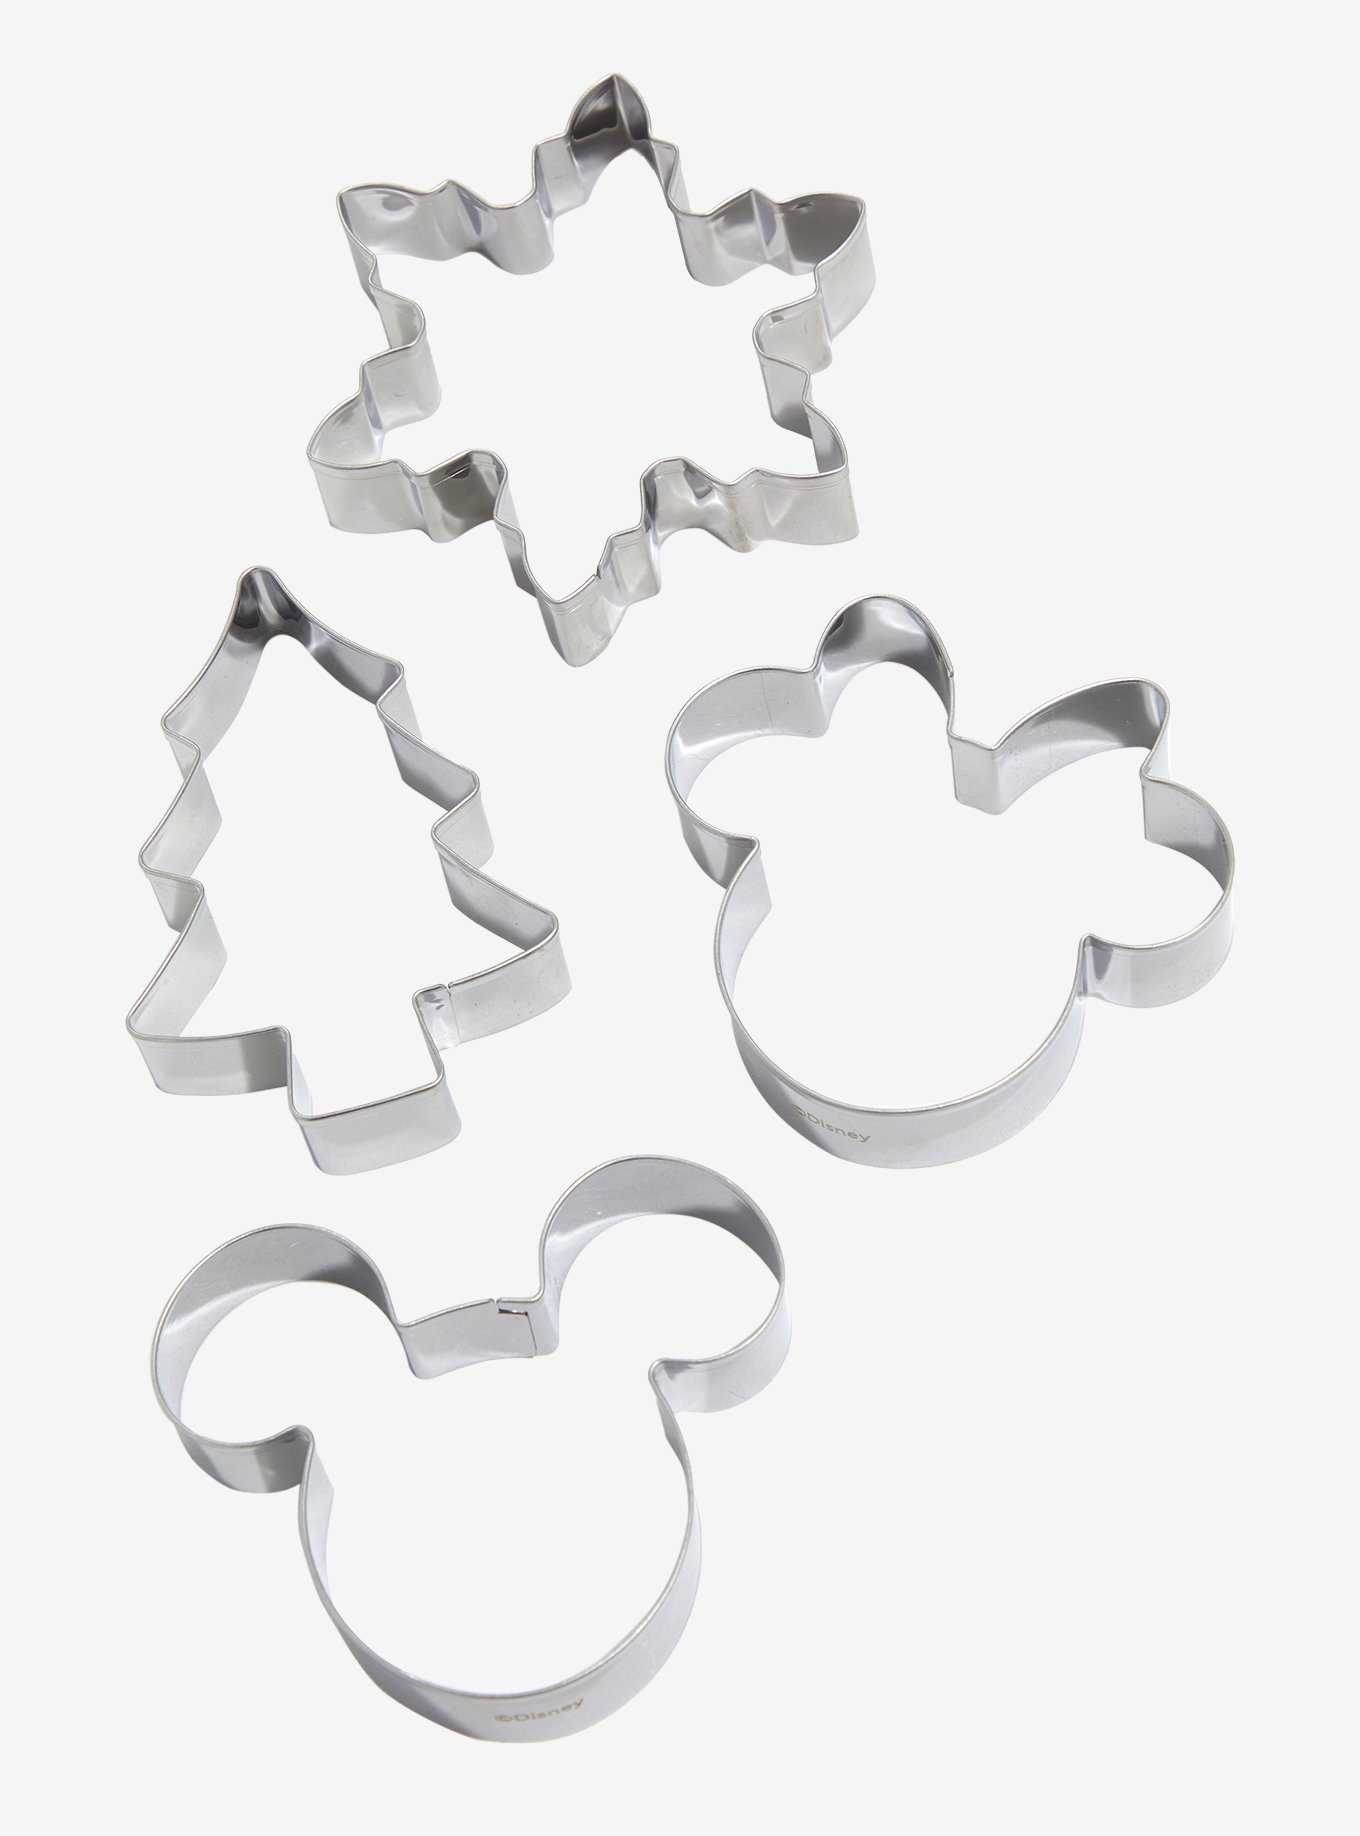 Disney Holiday Cookie Cutter Set, , hi-res